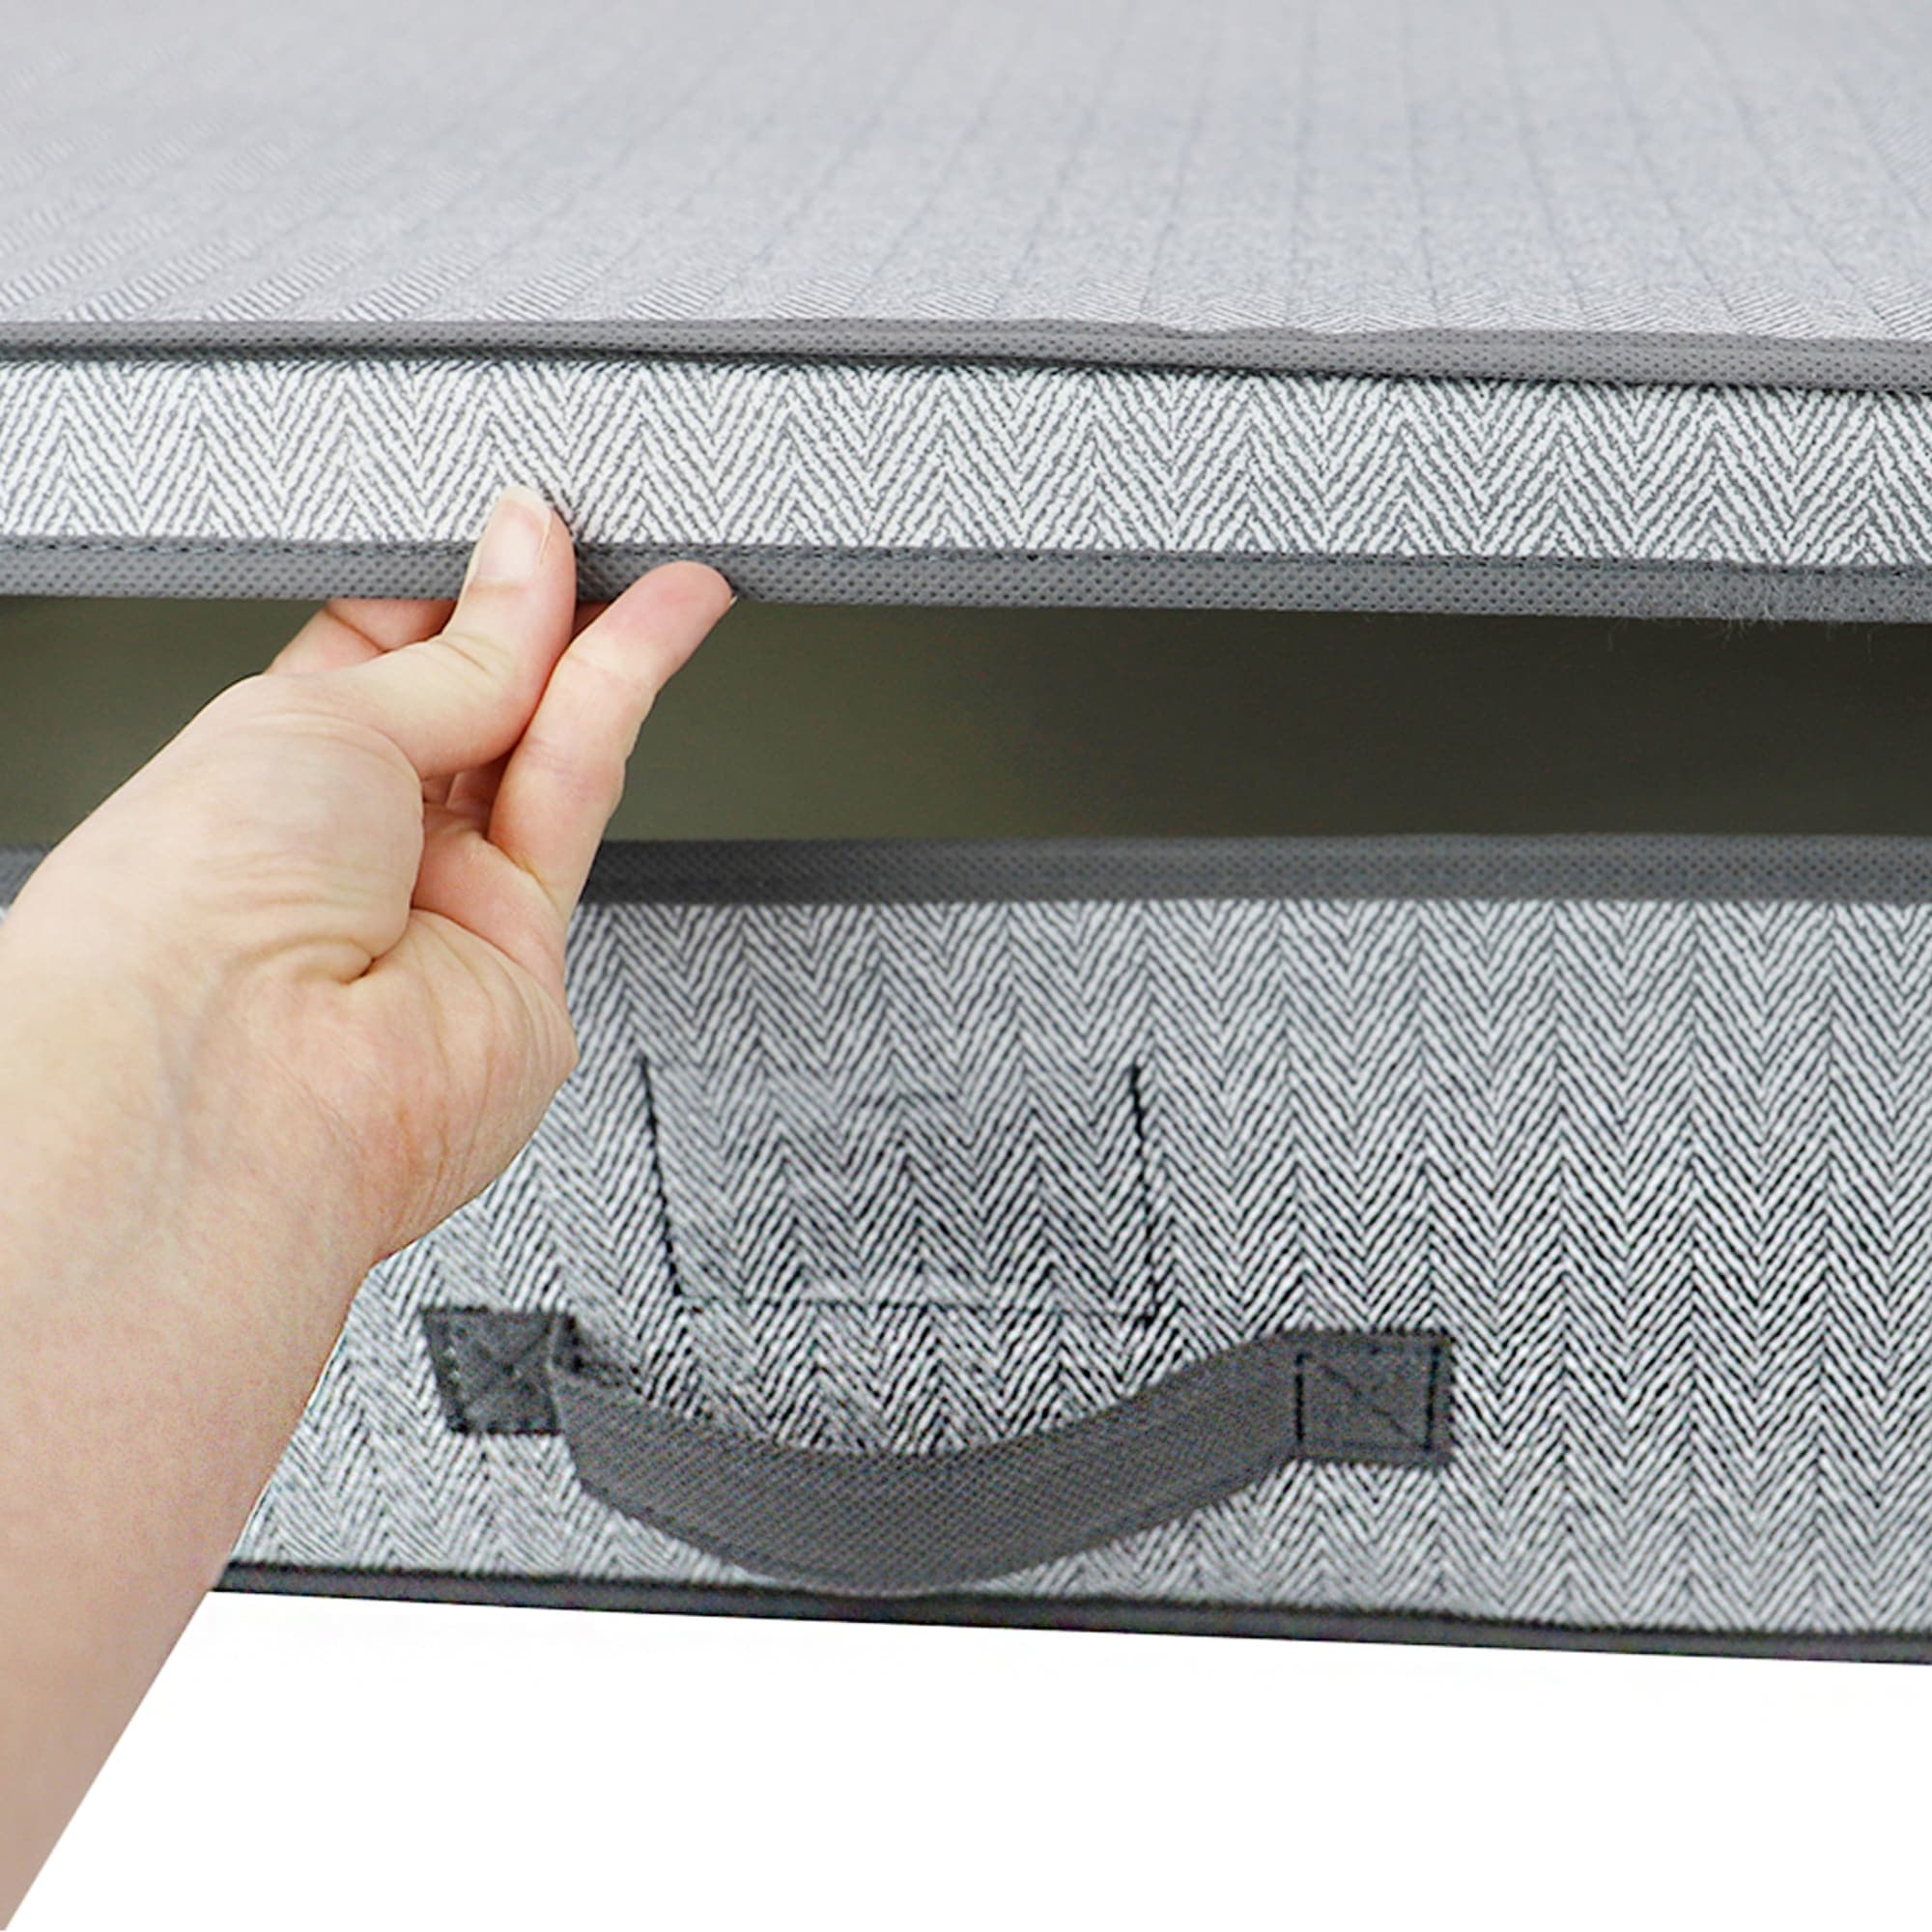 Home Basics Herringbone Non-woven Under the Bed Storage Box with Label Window, Grey $8.00 EACH, CASE PACK OF 12